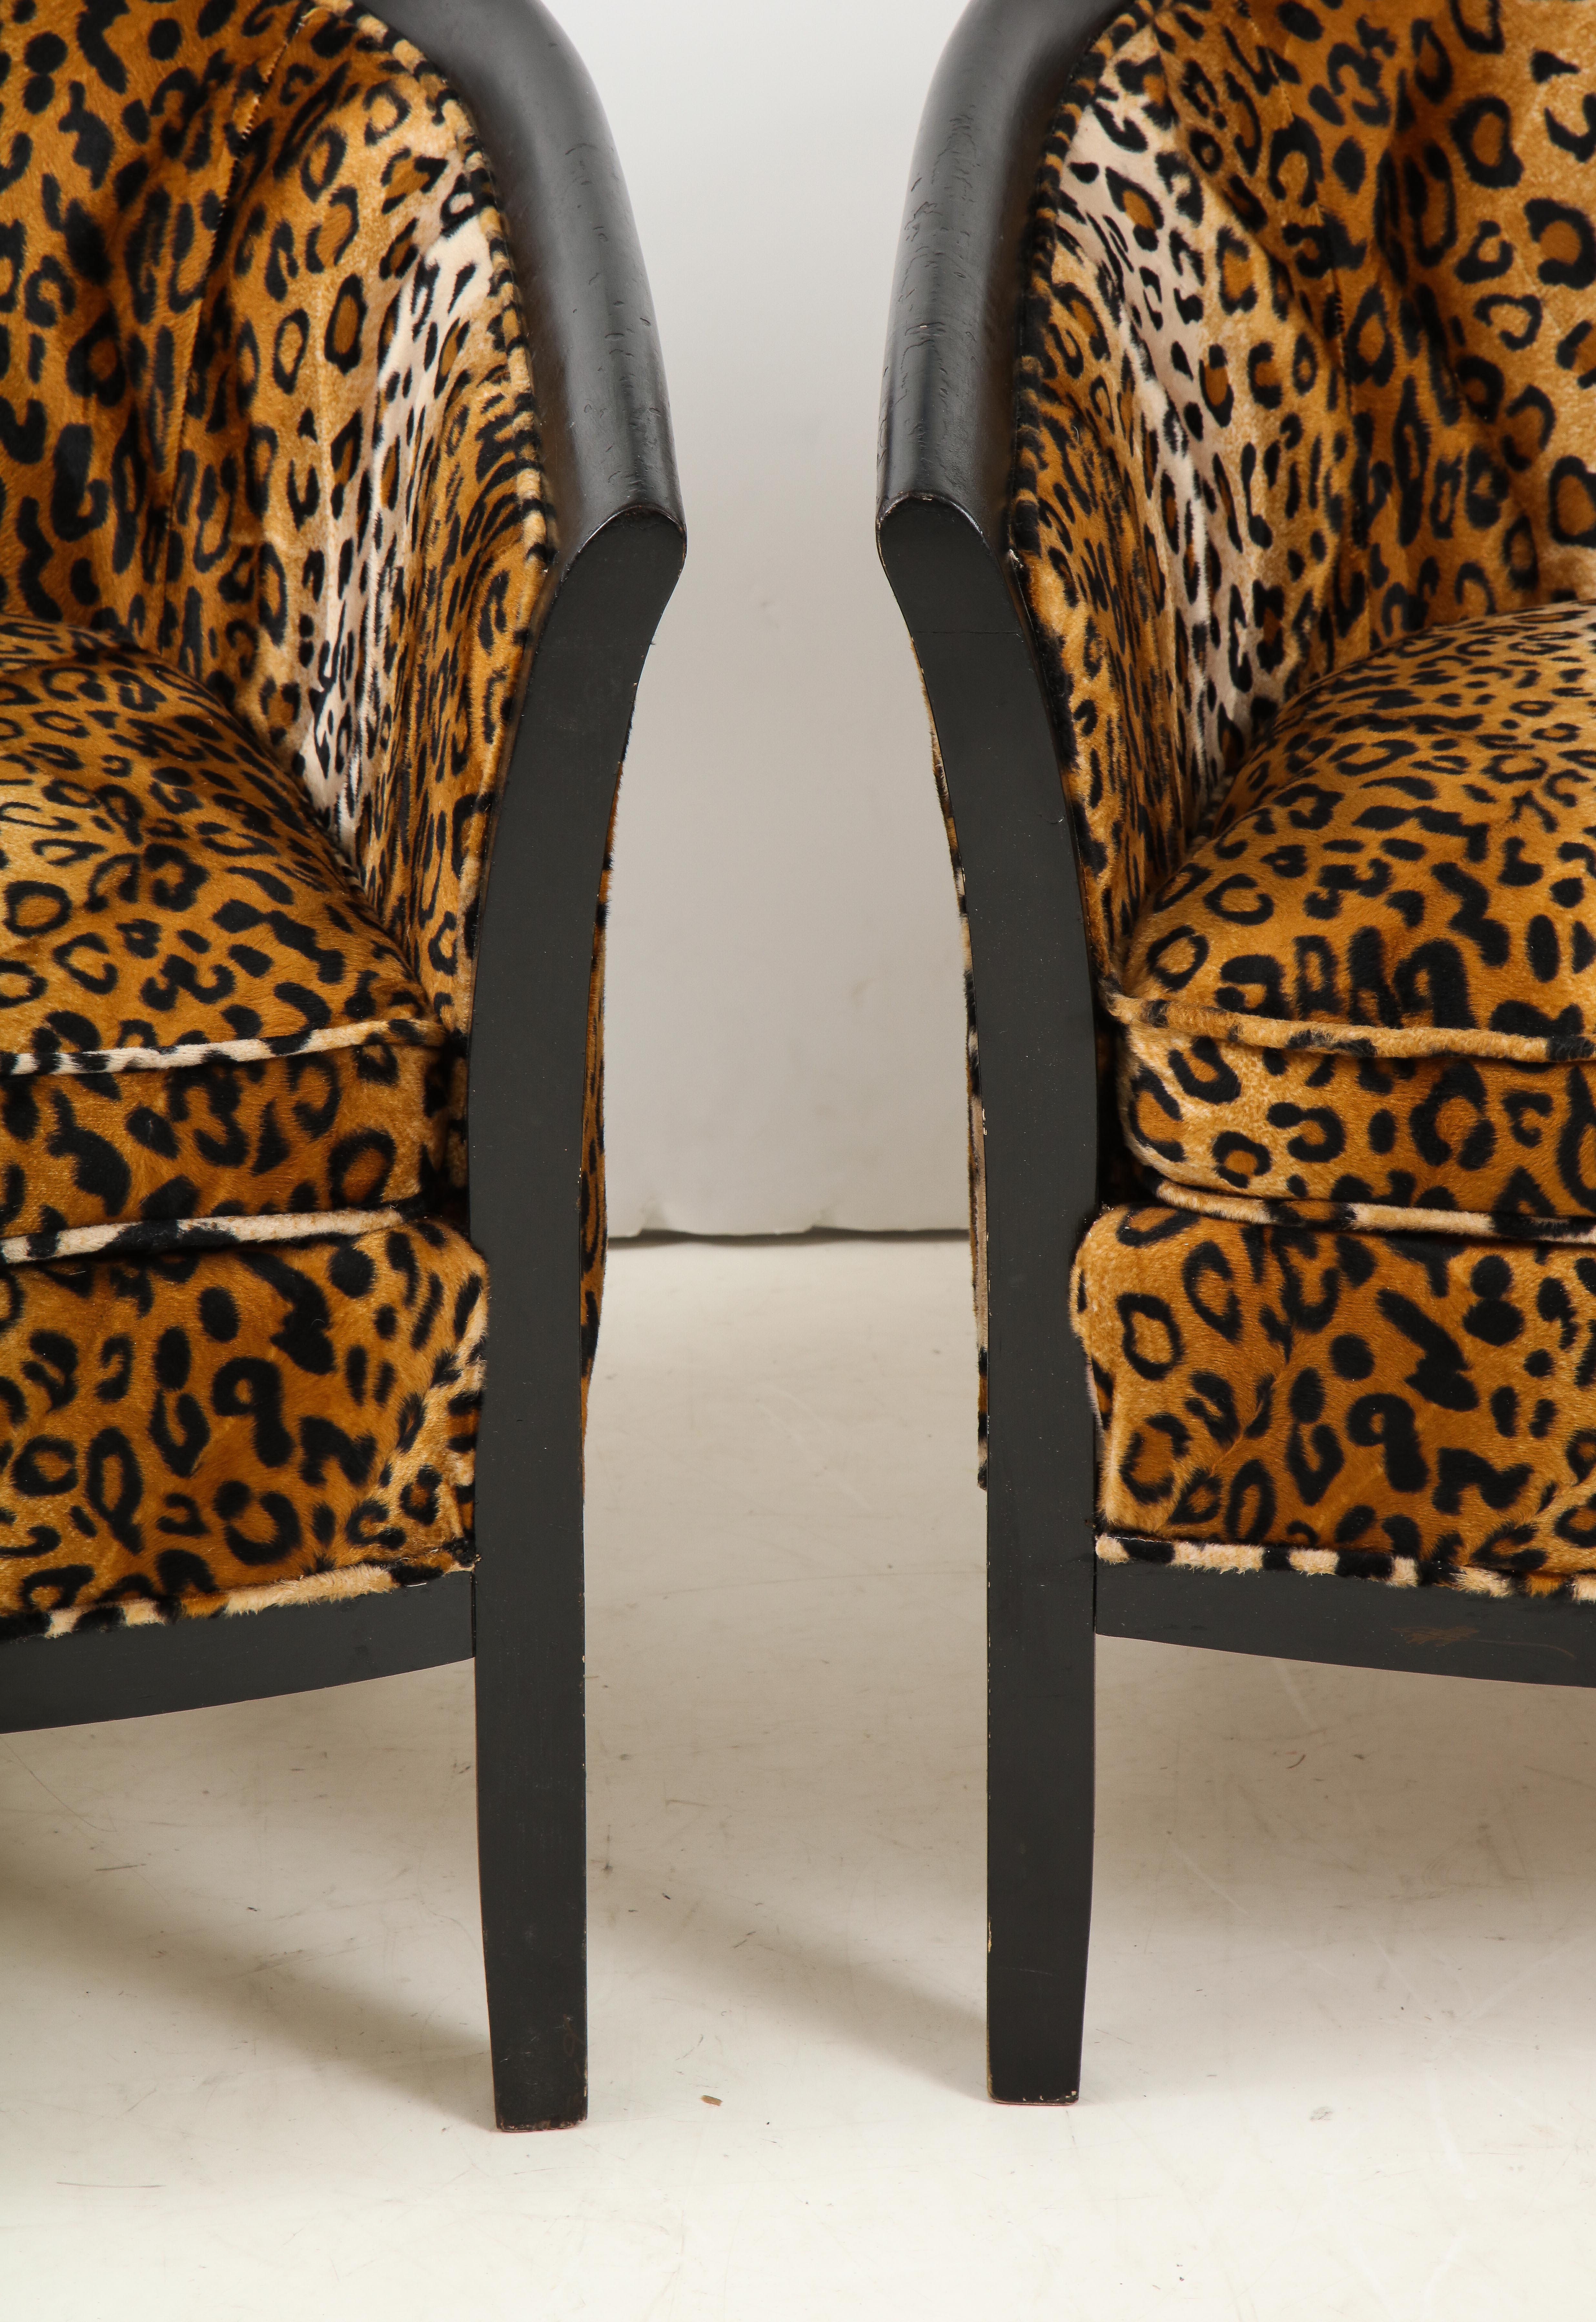 A pair vintage French barrel chairs in black lacquer with exposed square legs. Upholstered in a leopard velvet, these chairs will add instant personality to any room.